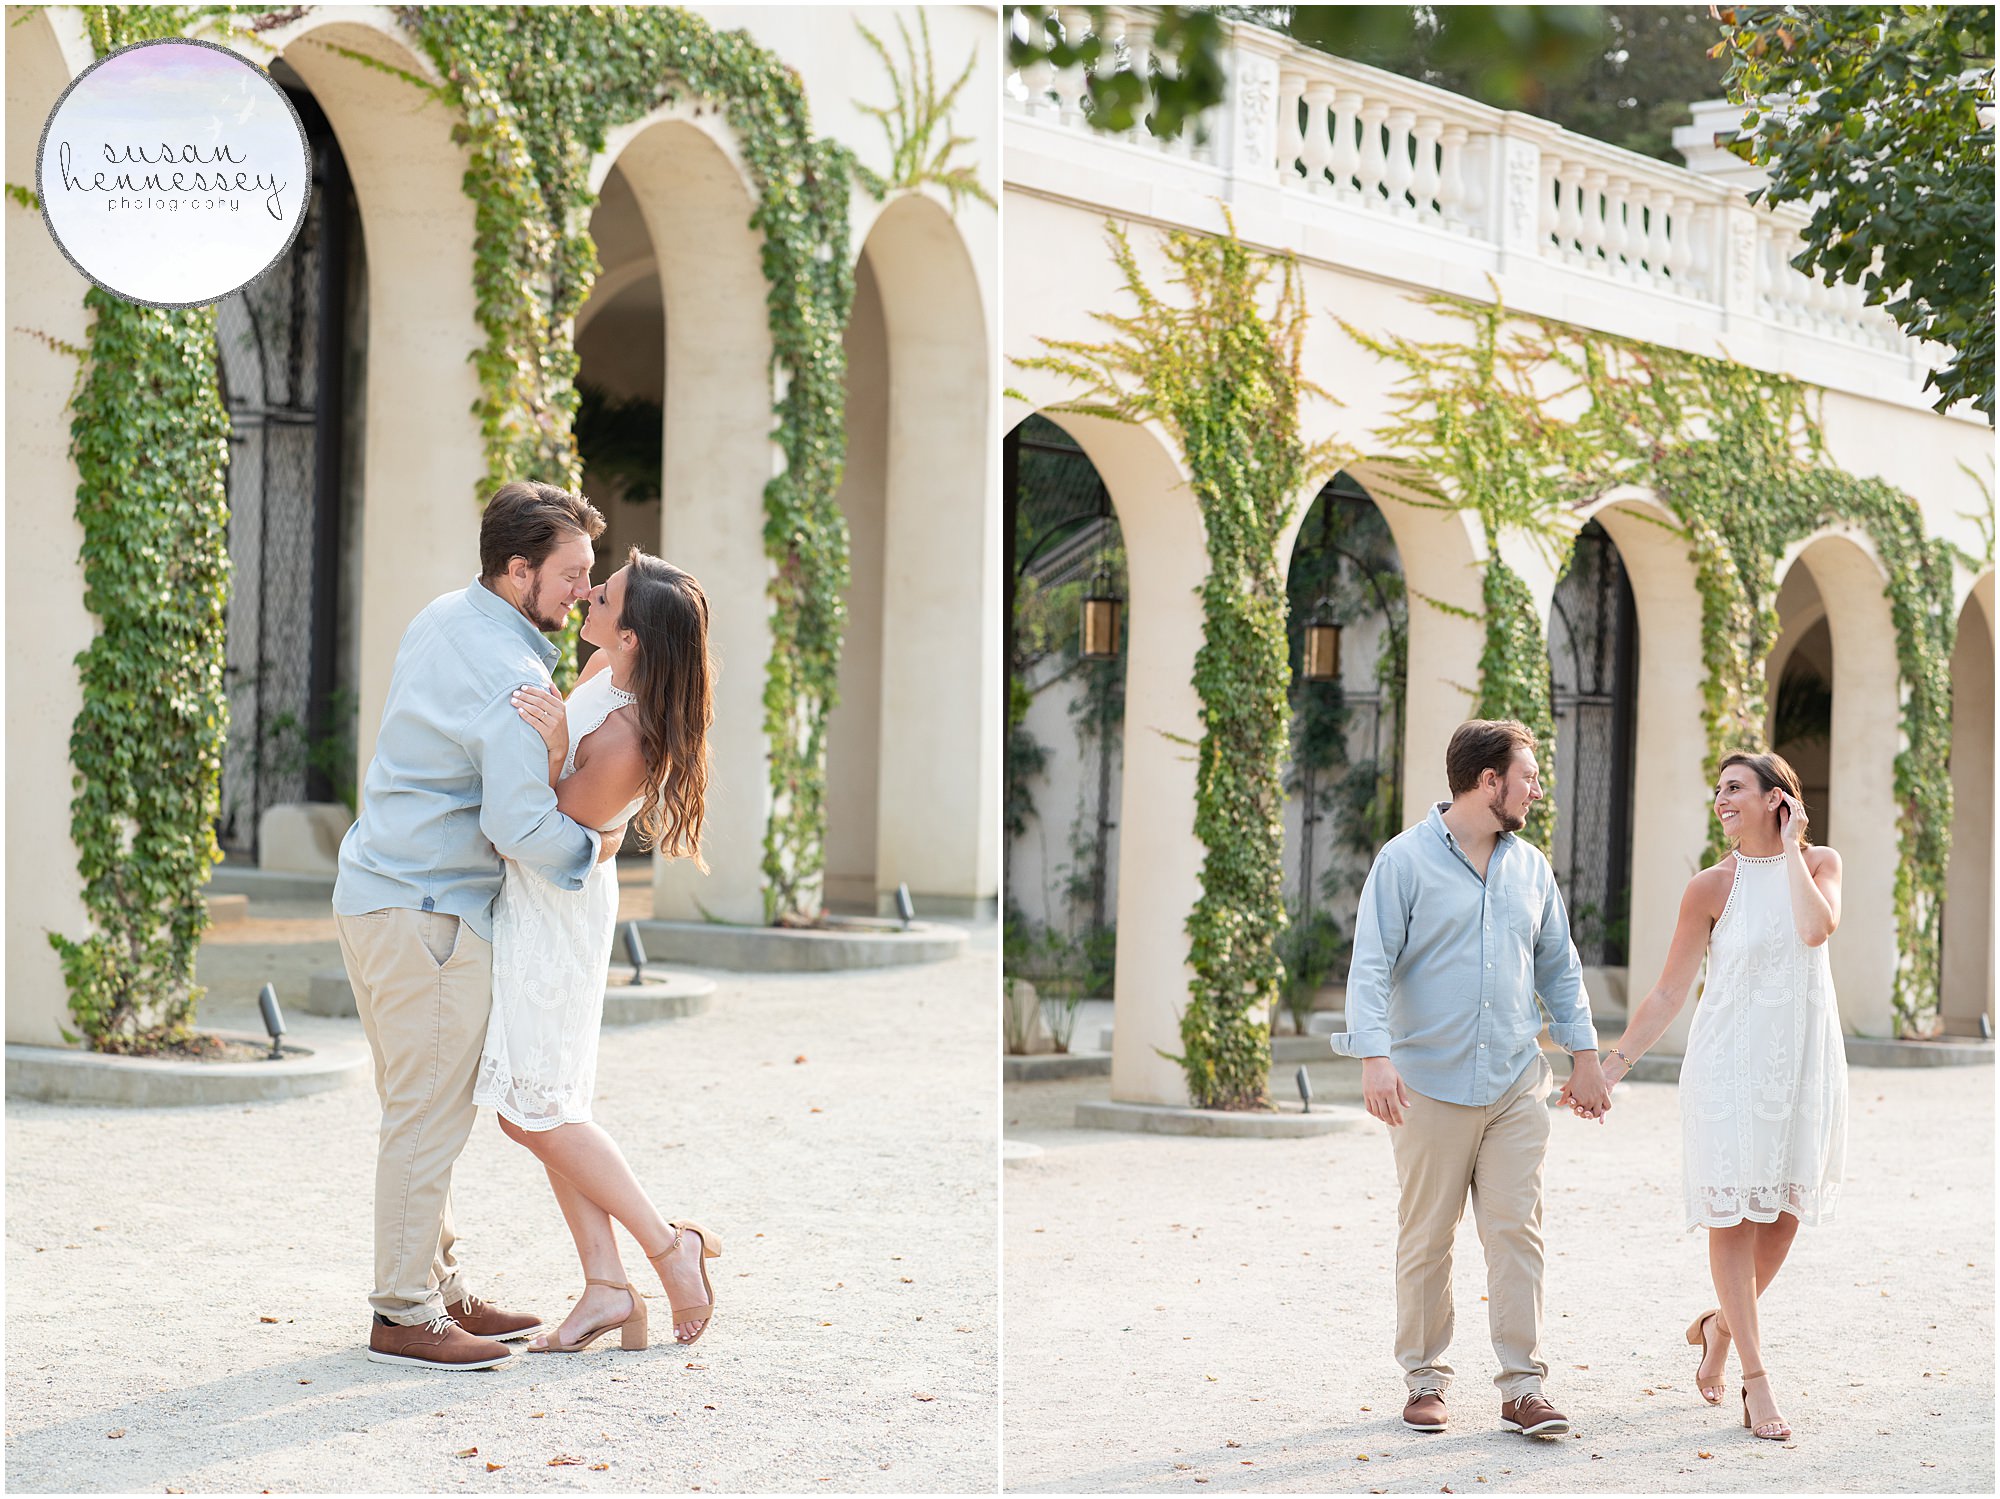 Two romantic images from a couples photography session at Longwood Gardens